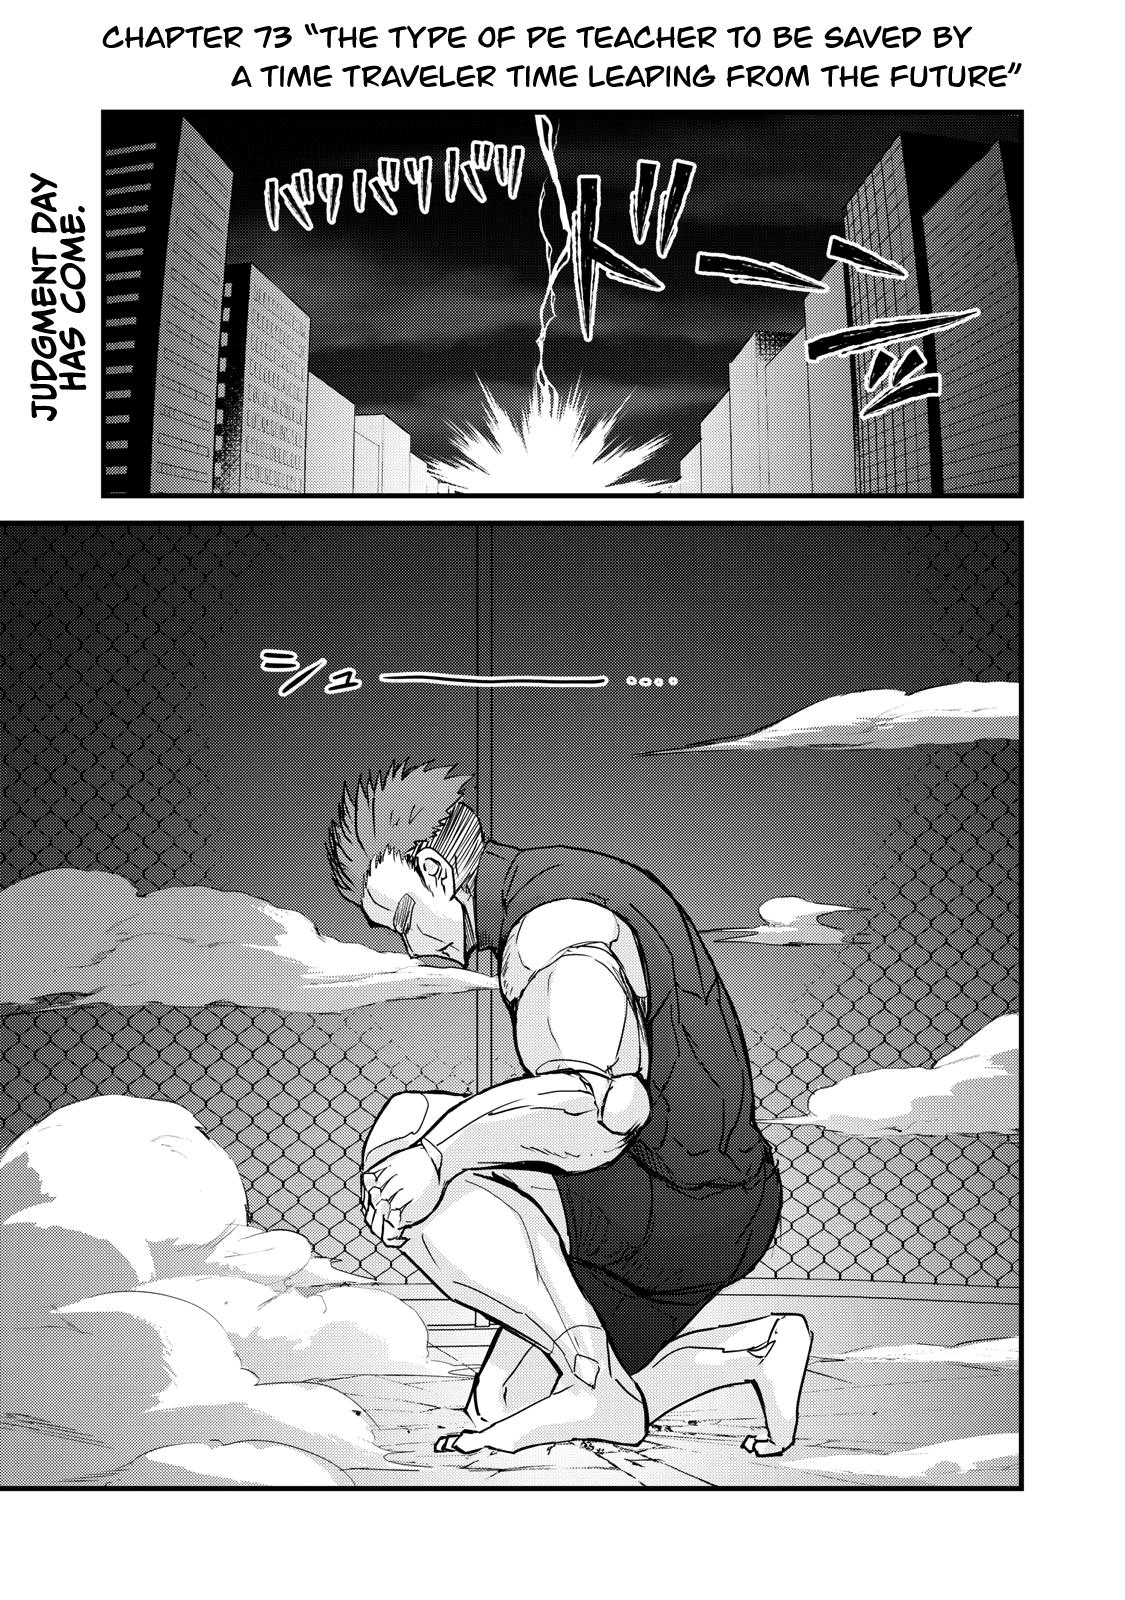 A Manga About The Kind Of Pe Teacher Who Dies At The Start Of A School Horror Movie - 73 page 1-a2f5c313